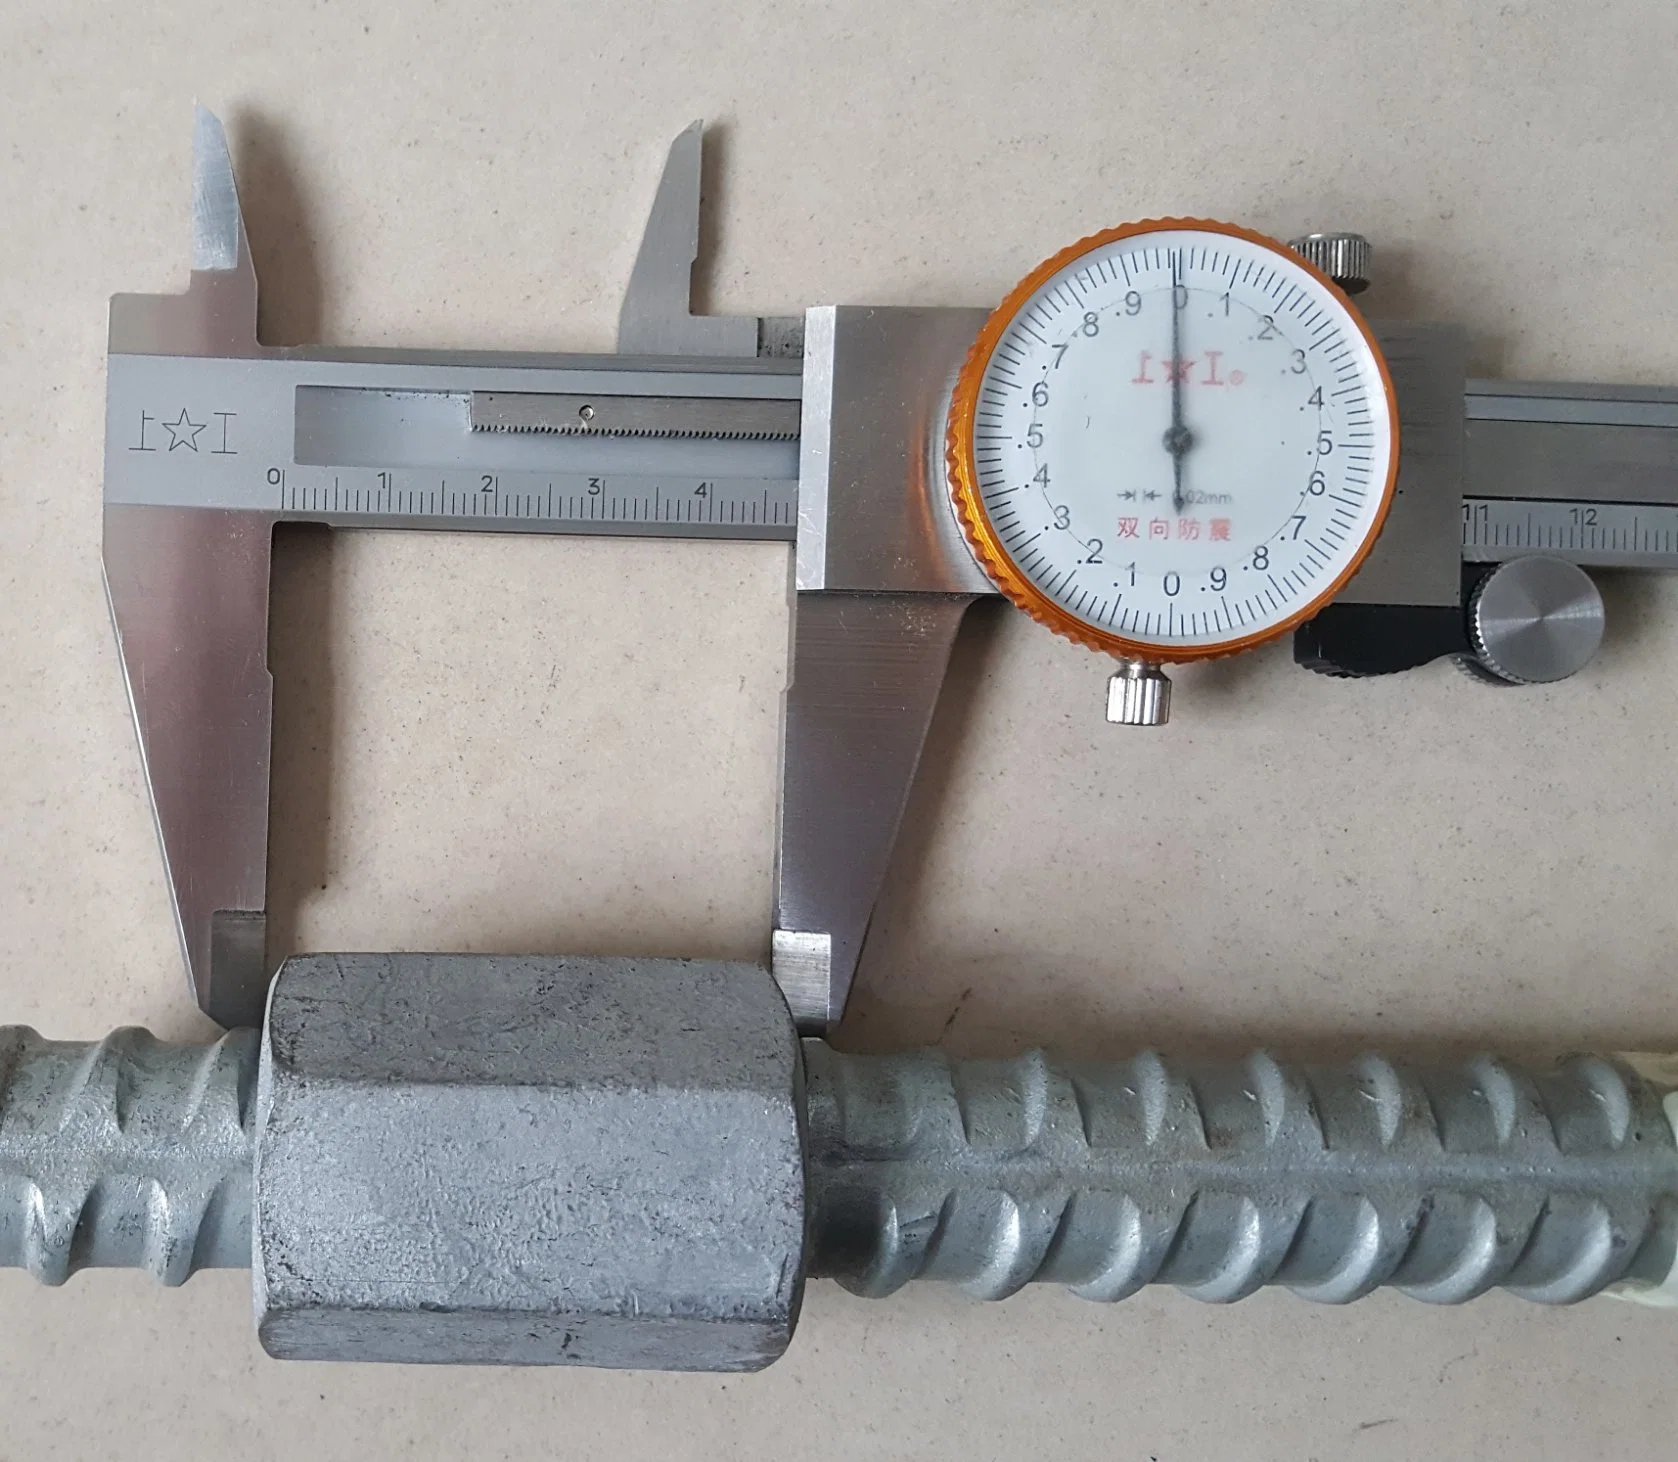 M20-Psb500 Hot Rolled Left Thread Bar for Formwork Tie